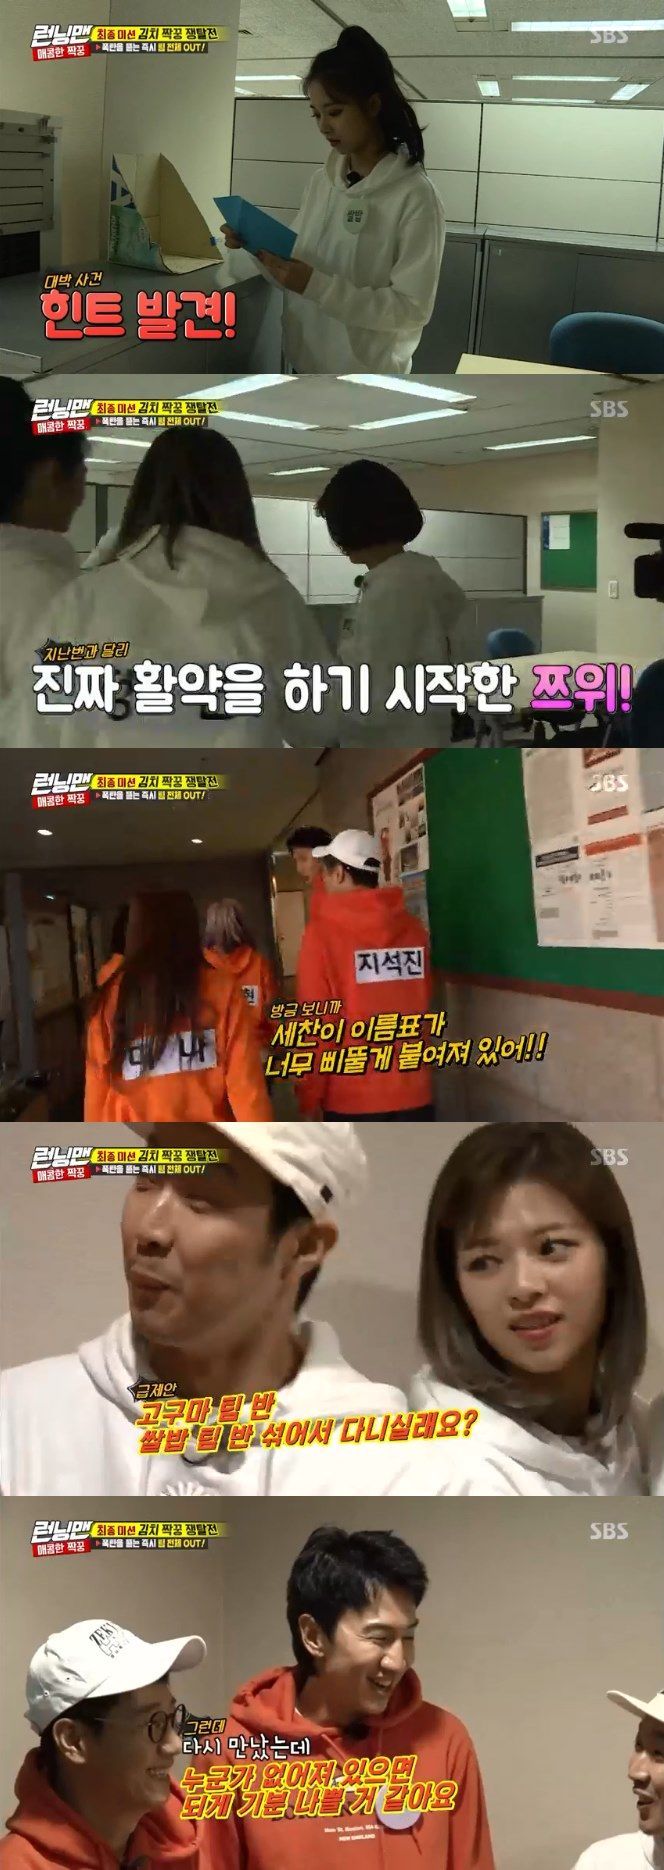 <p>2 days broadcast SBS Running Manin Running Man sister group TWICE the entire game as scramble. TWICE in the last 4 Julys people X as joined 1 year anniversary’ special guest surprise appearances by school the and comic dance showdown, such as the active with numerous topics to give birth, and the ‘Running Man’ Year of the pandas, star-crowned.</p><p>This day, kimchi paired Peek-A-Boo contend, Adam becomes TWICE and the Running Man members. Generation stars kimchi and well matched the food survey results on Sweet potato, Rice, Can Education, to a team of confrontation unfolded. Most members are the answer.; if the team started looking.</p><p>What is left are called the team and the Sweet potato team, Can Education of the team fight. If a team is passing the vehicle up to take to the headquarters as the hidden people. Me and three as passengers in the car to sneak in the headquarters seat to go up.</p><p>But Headquarters analysis yen Sweet potato team Ive been hiding it. Sweet potato team of the analysis is the amount and more like the name of the tag to tear the bomb, I notice. I smoke until the end of the menu you watched the final you won.</p>